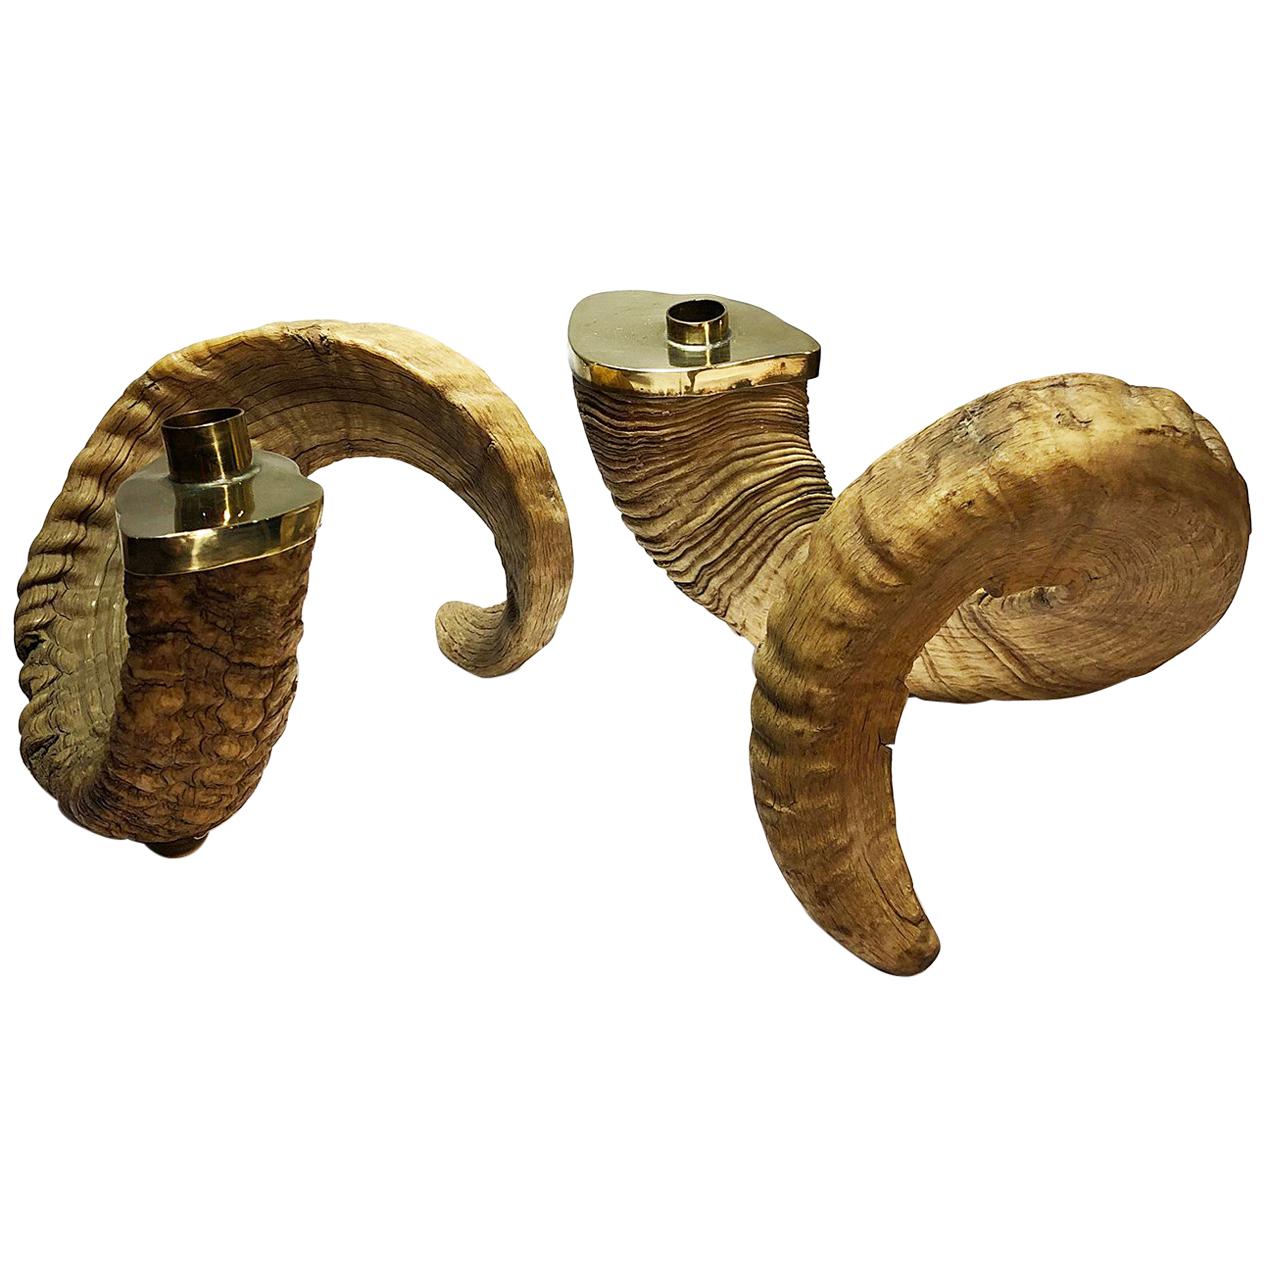 Pair of Large Ram Horns and Brass Candleholders